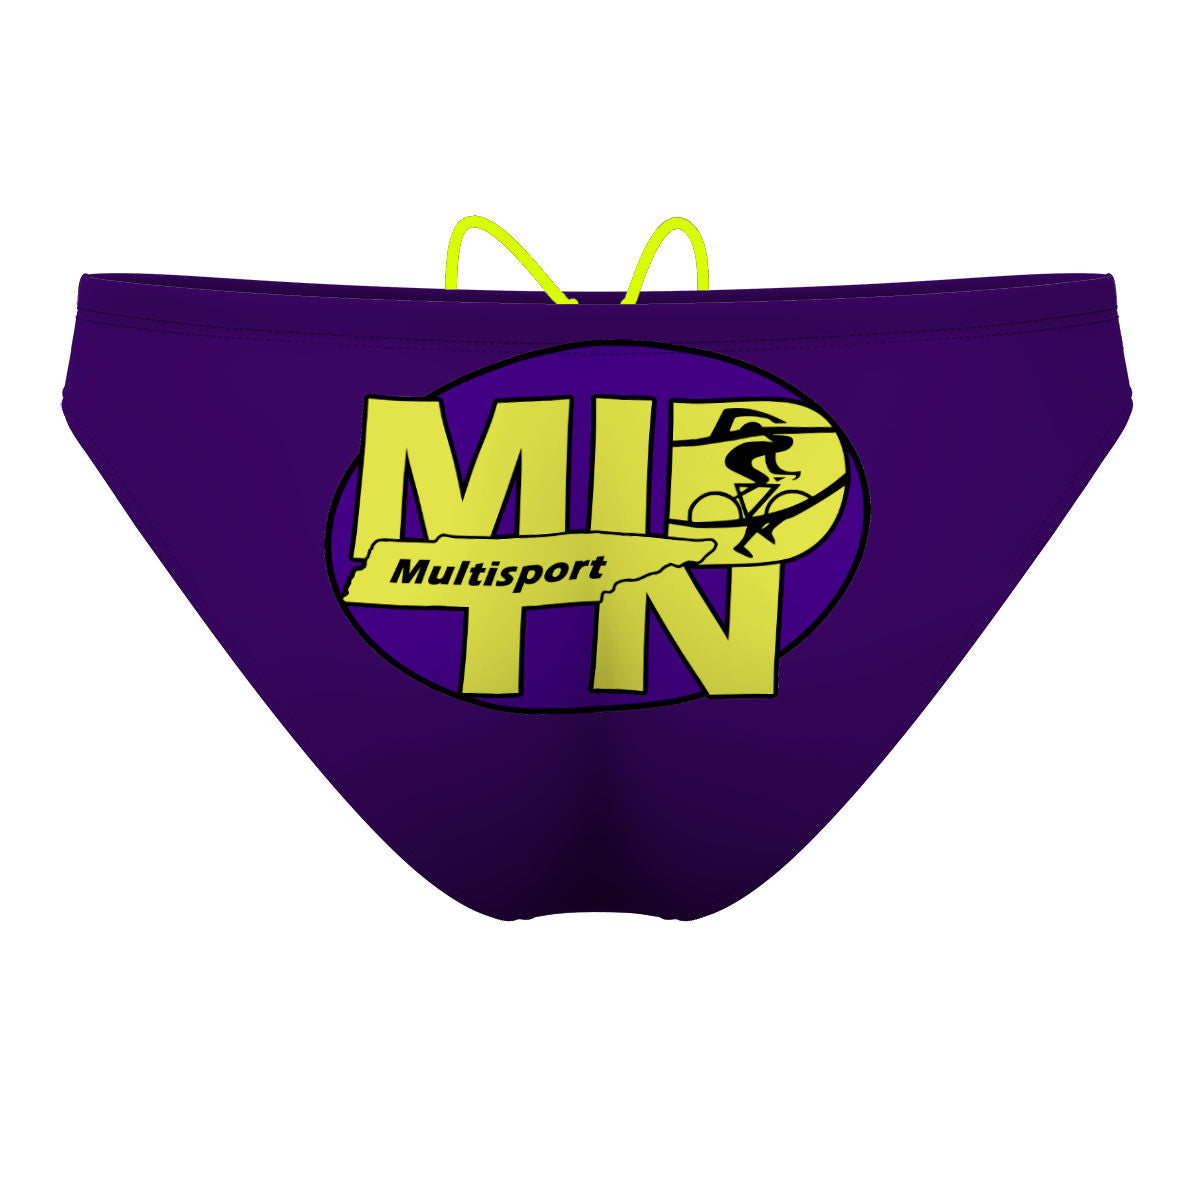 98triumpht595@gmail.com - Waterpolo Brief Swimsuit